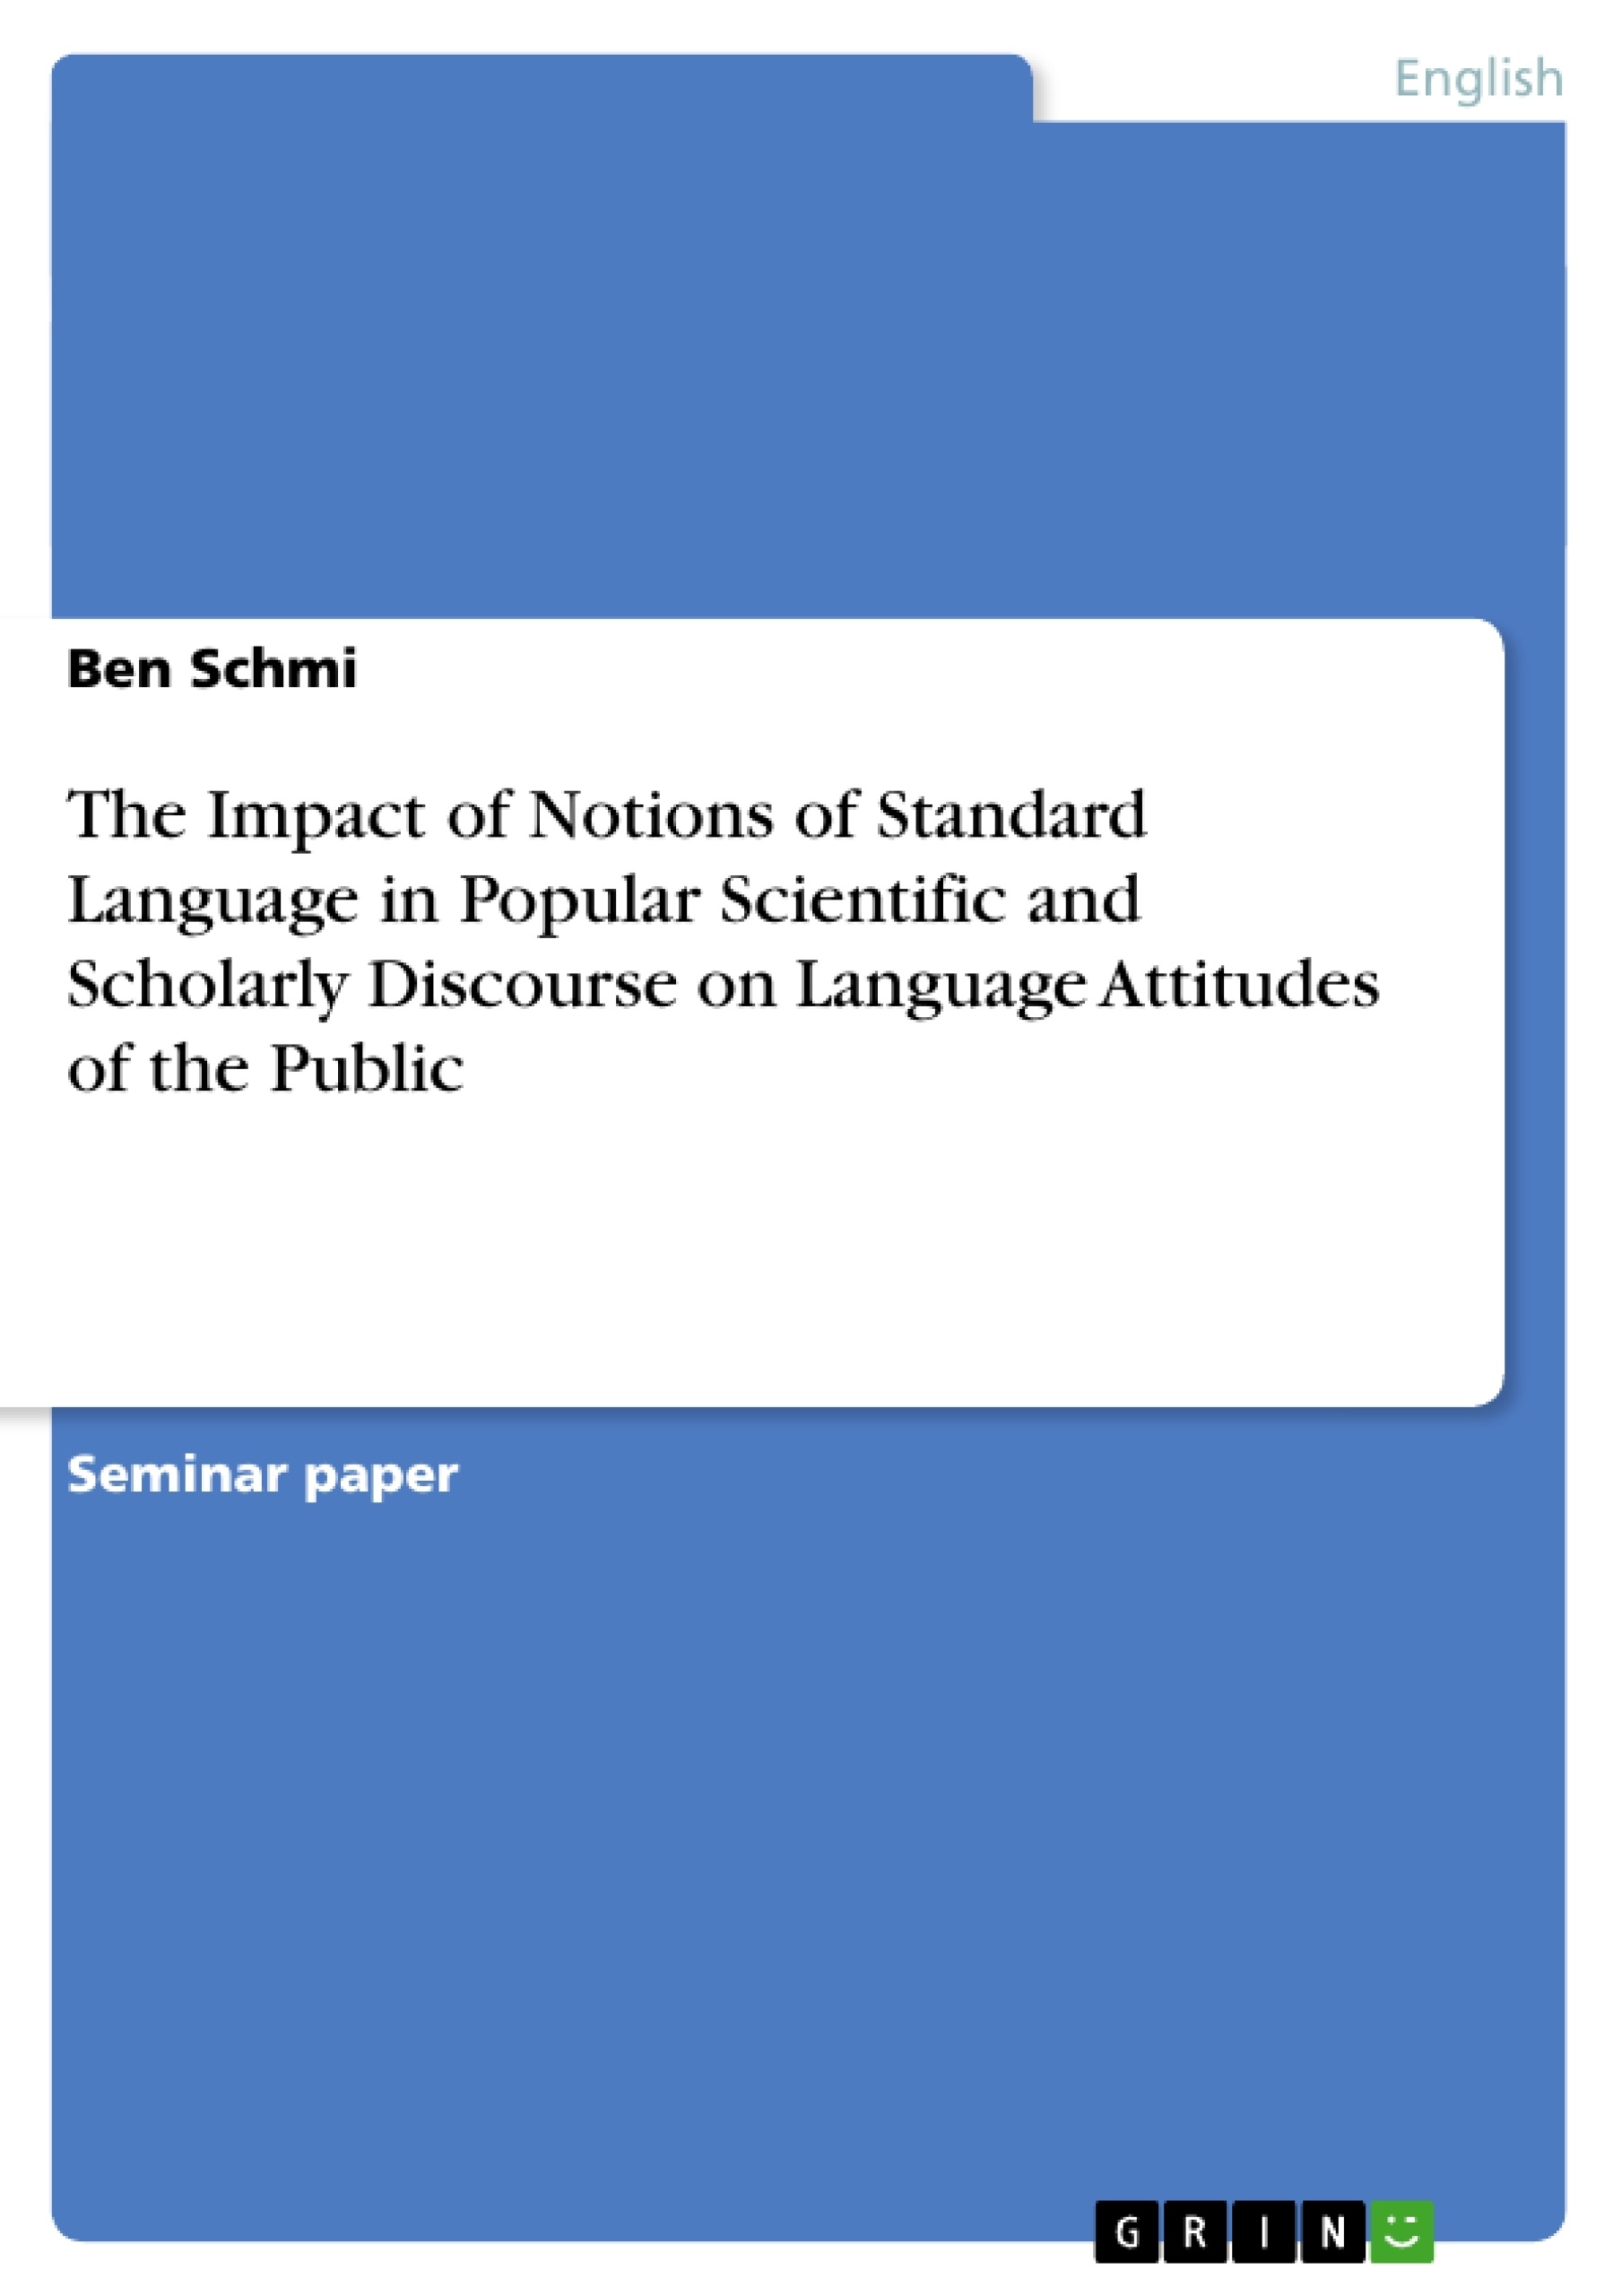 Title: The Impact of Notions of Standard Language in Popular Scientific and Scholarly Discourse on Language Attitudes of the Public